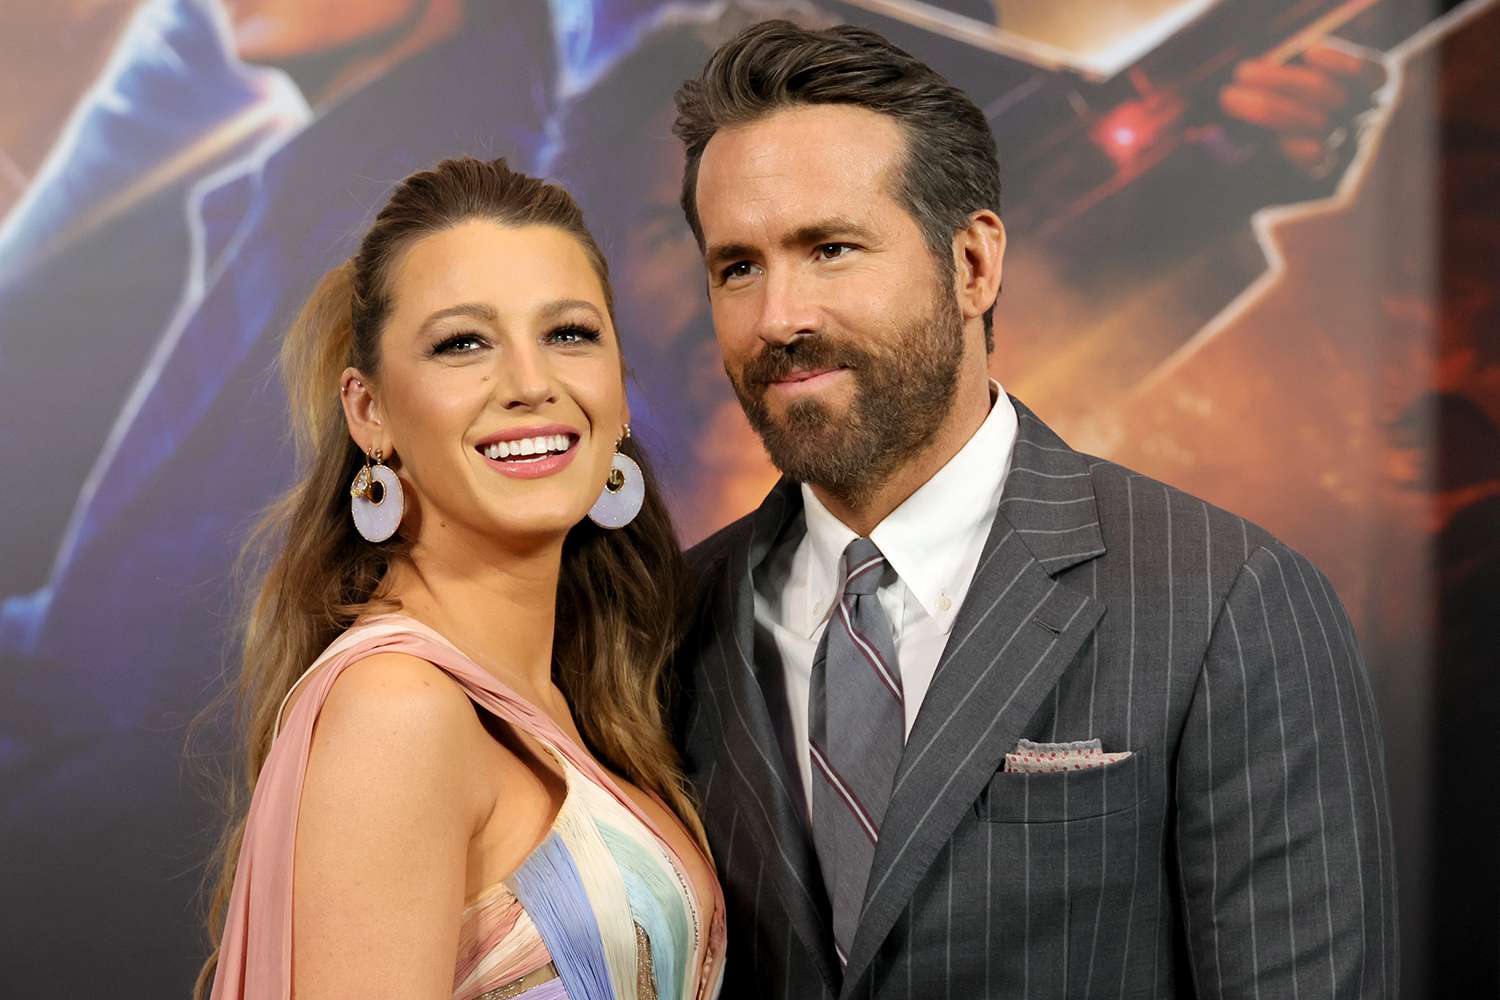 Blake Lively and Ryan Reynolds attend "The Adam Project" New York Premiere